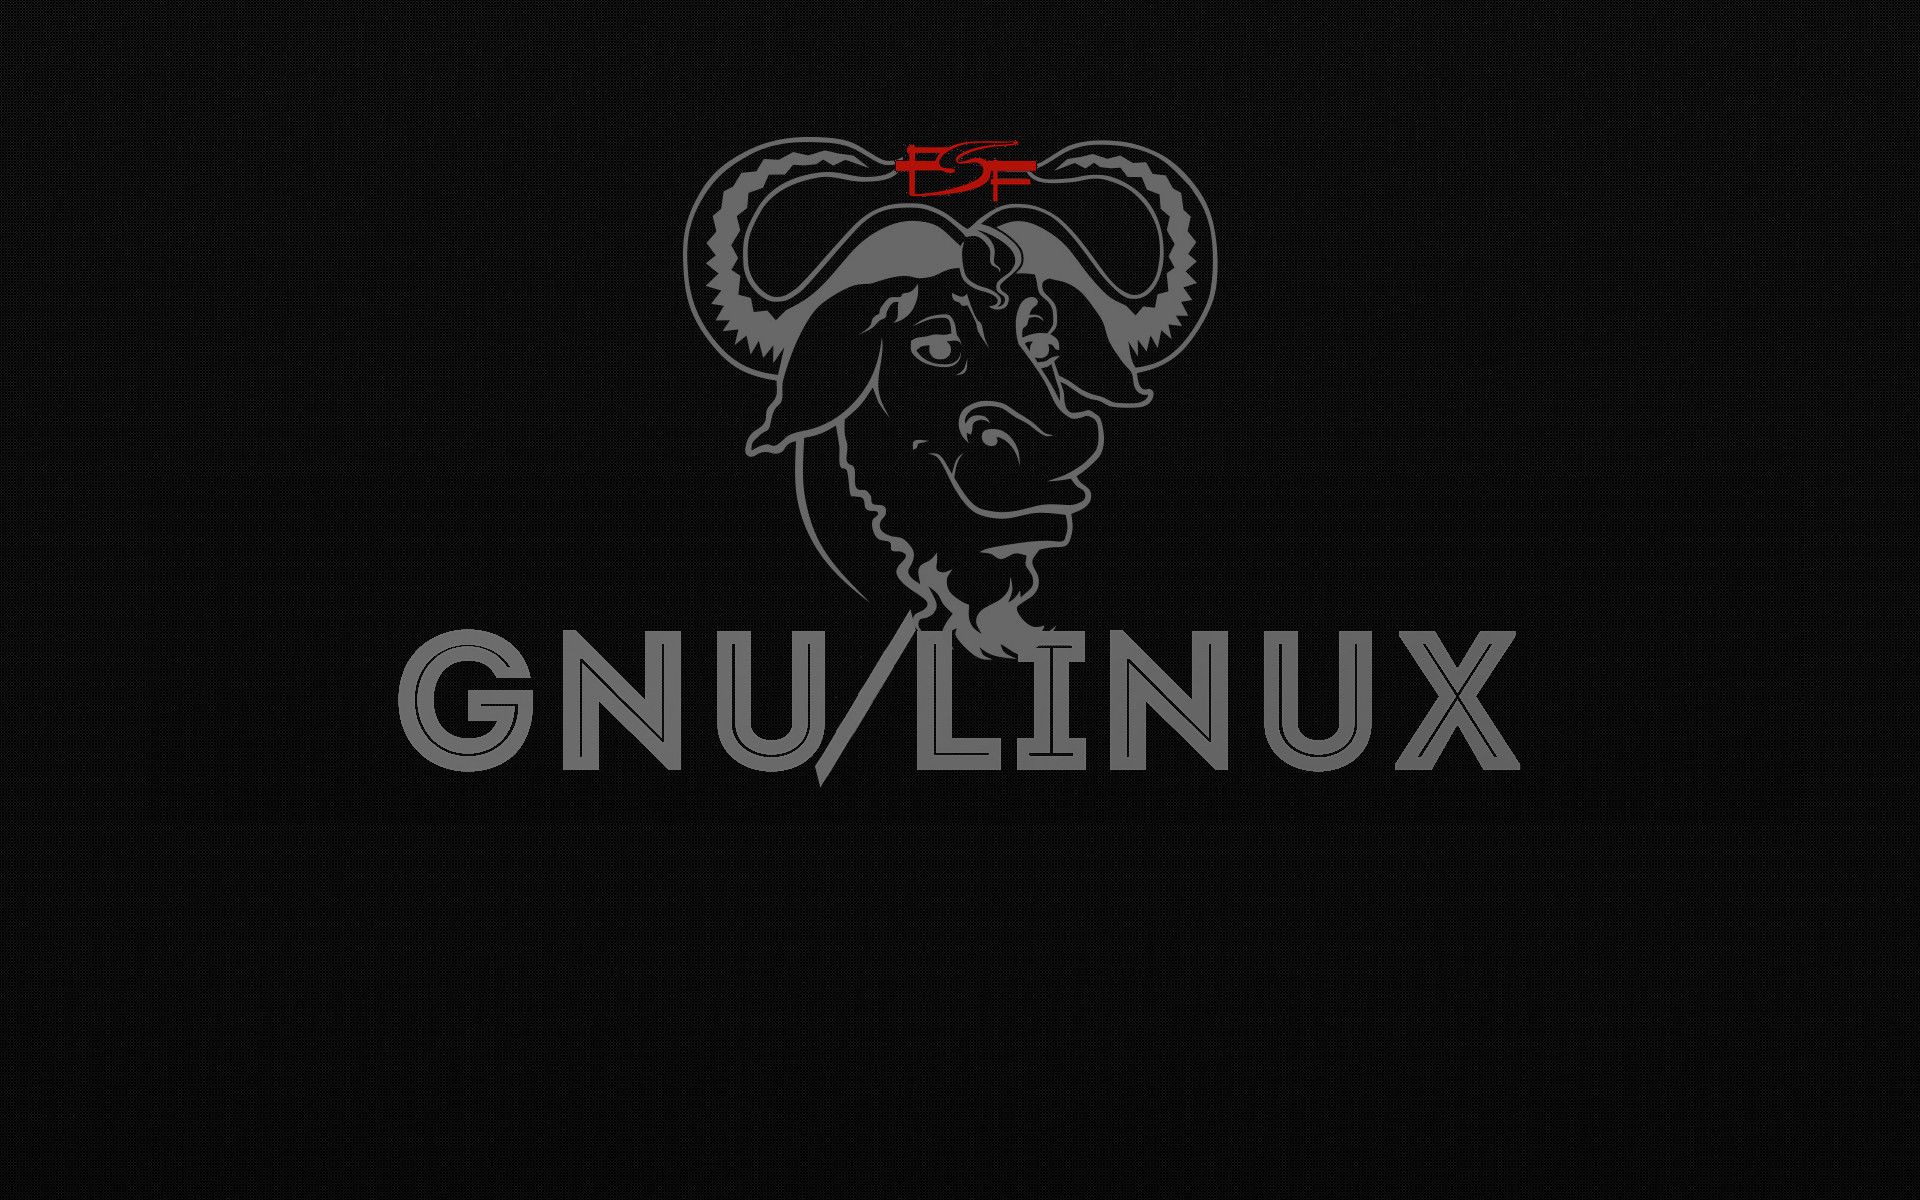 GNU Designs by Skwid Project Software Foundation